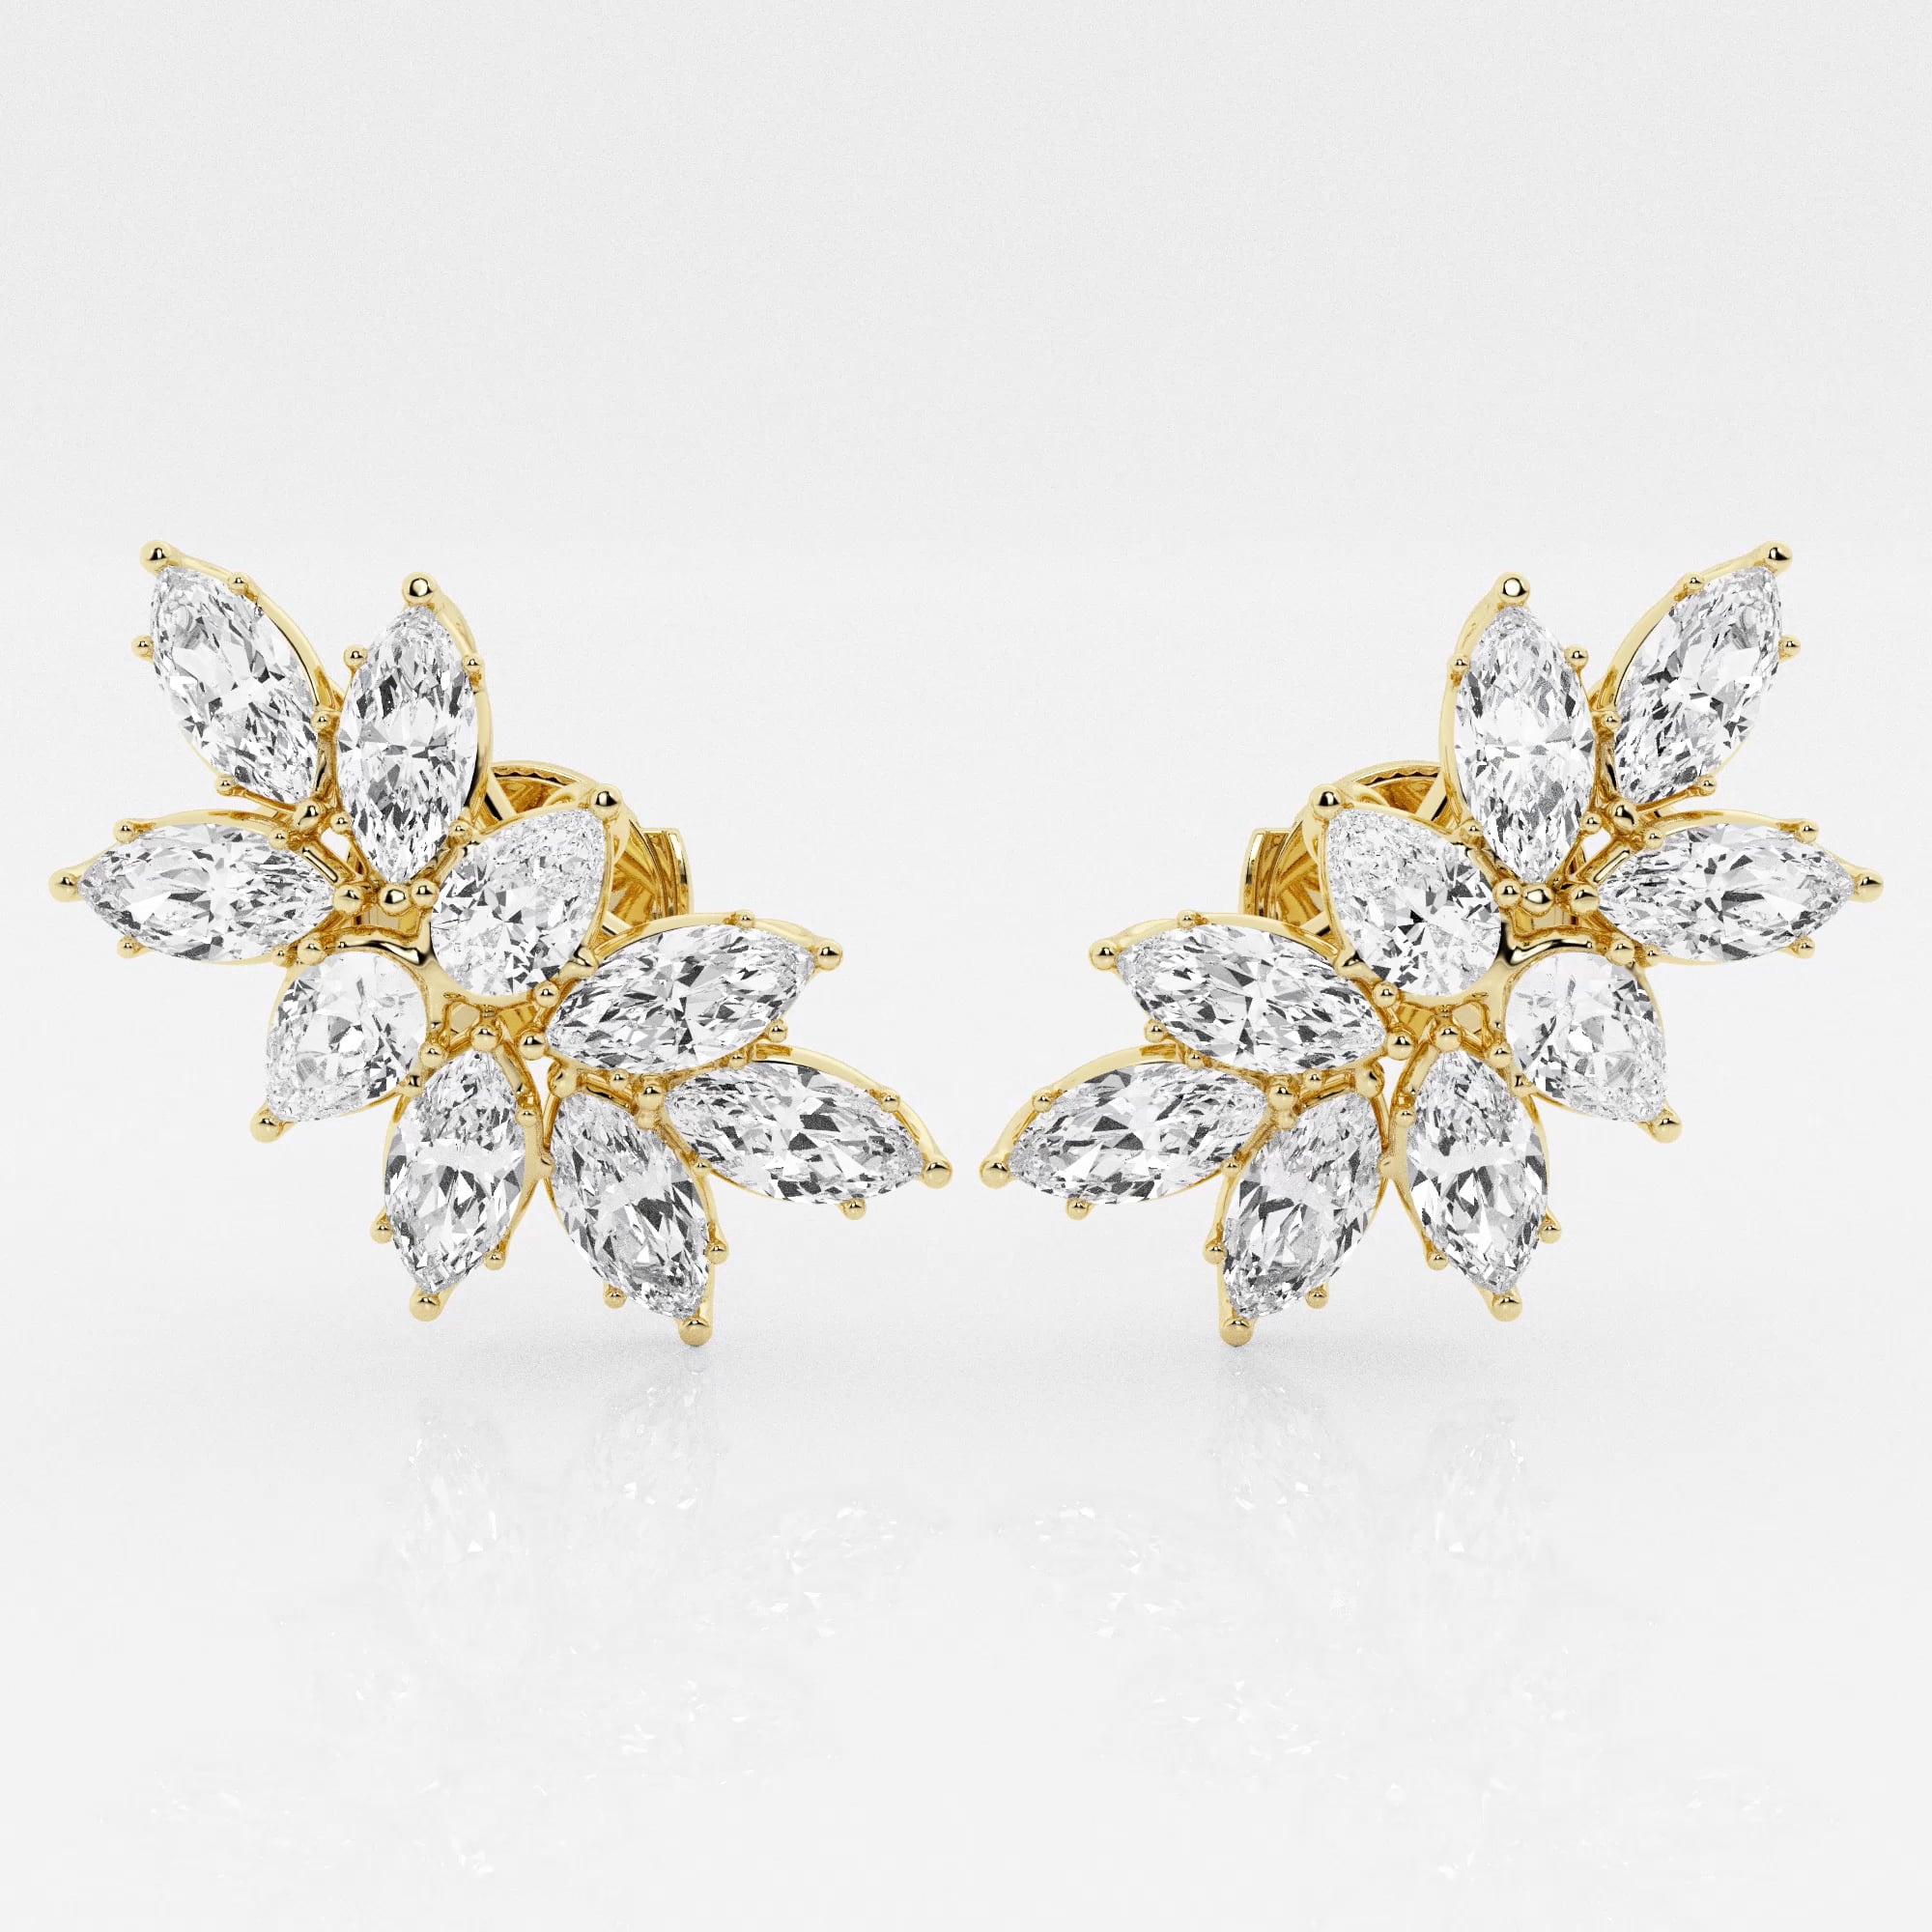 product video for Badgley Mischka 4 ctw Pear & Marquise Lab Grown Diamond Cluster Fashion Earrings